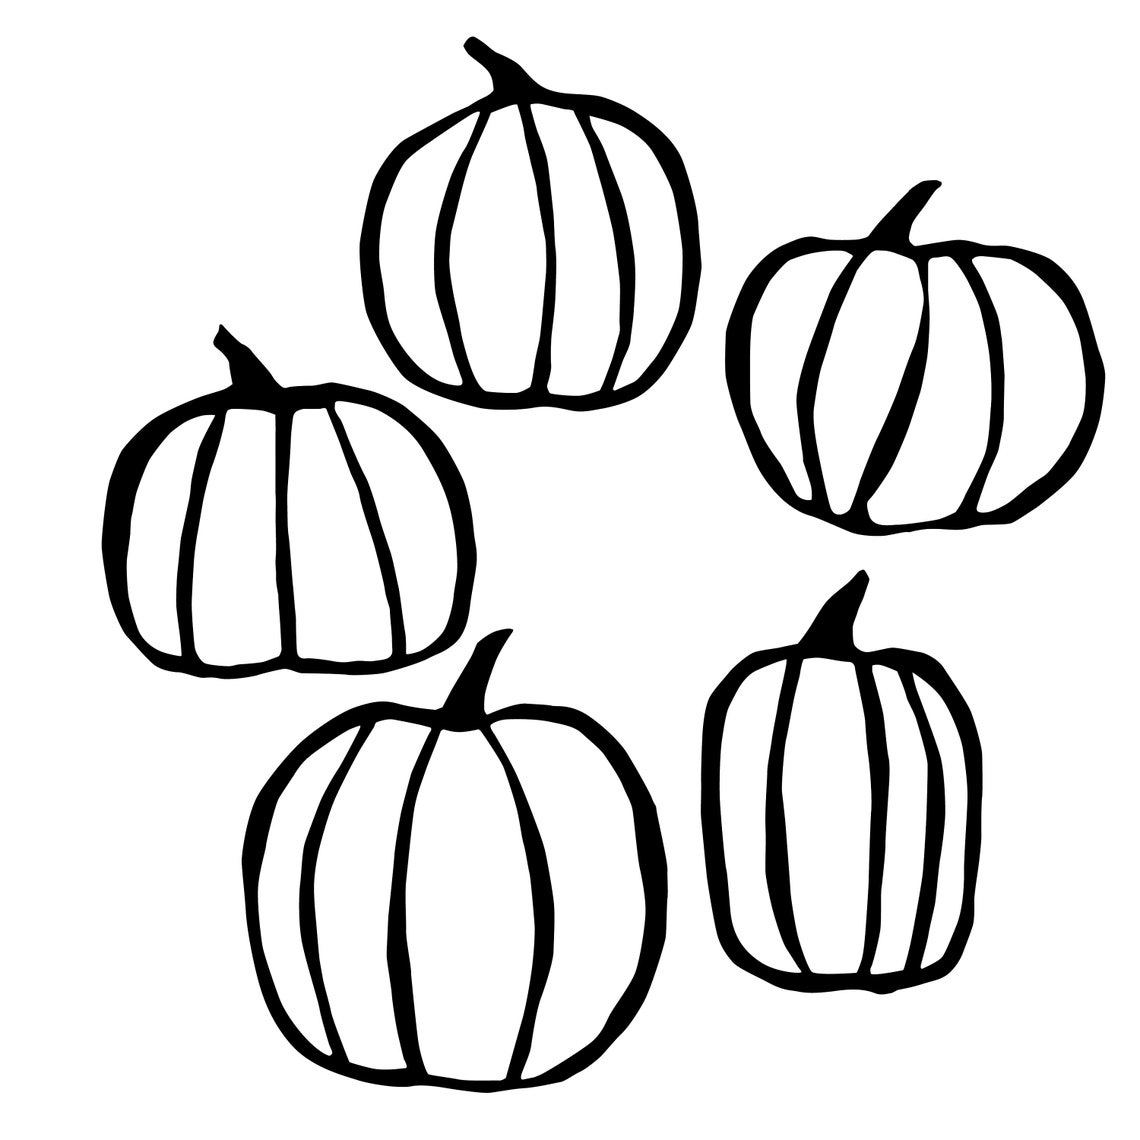 THANKSGIVING Pumpkins SILHOUETTE ILLUSTRATIONS Drawing in Svg - Etsy